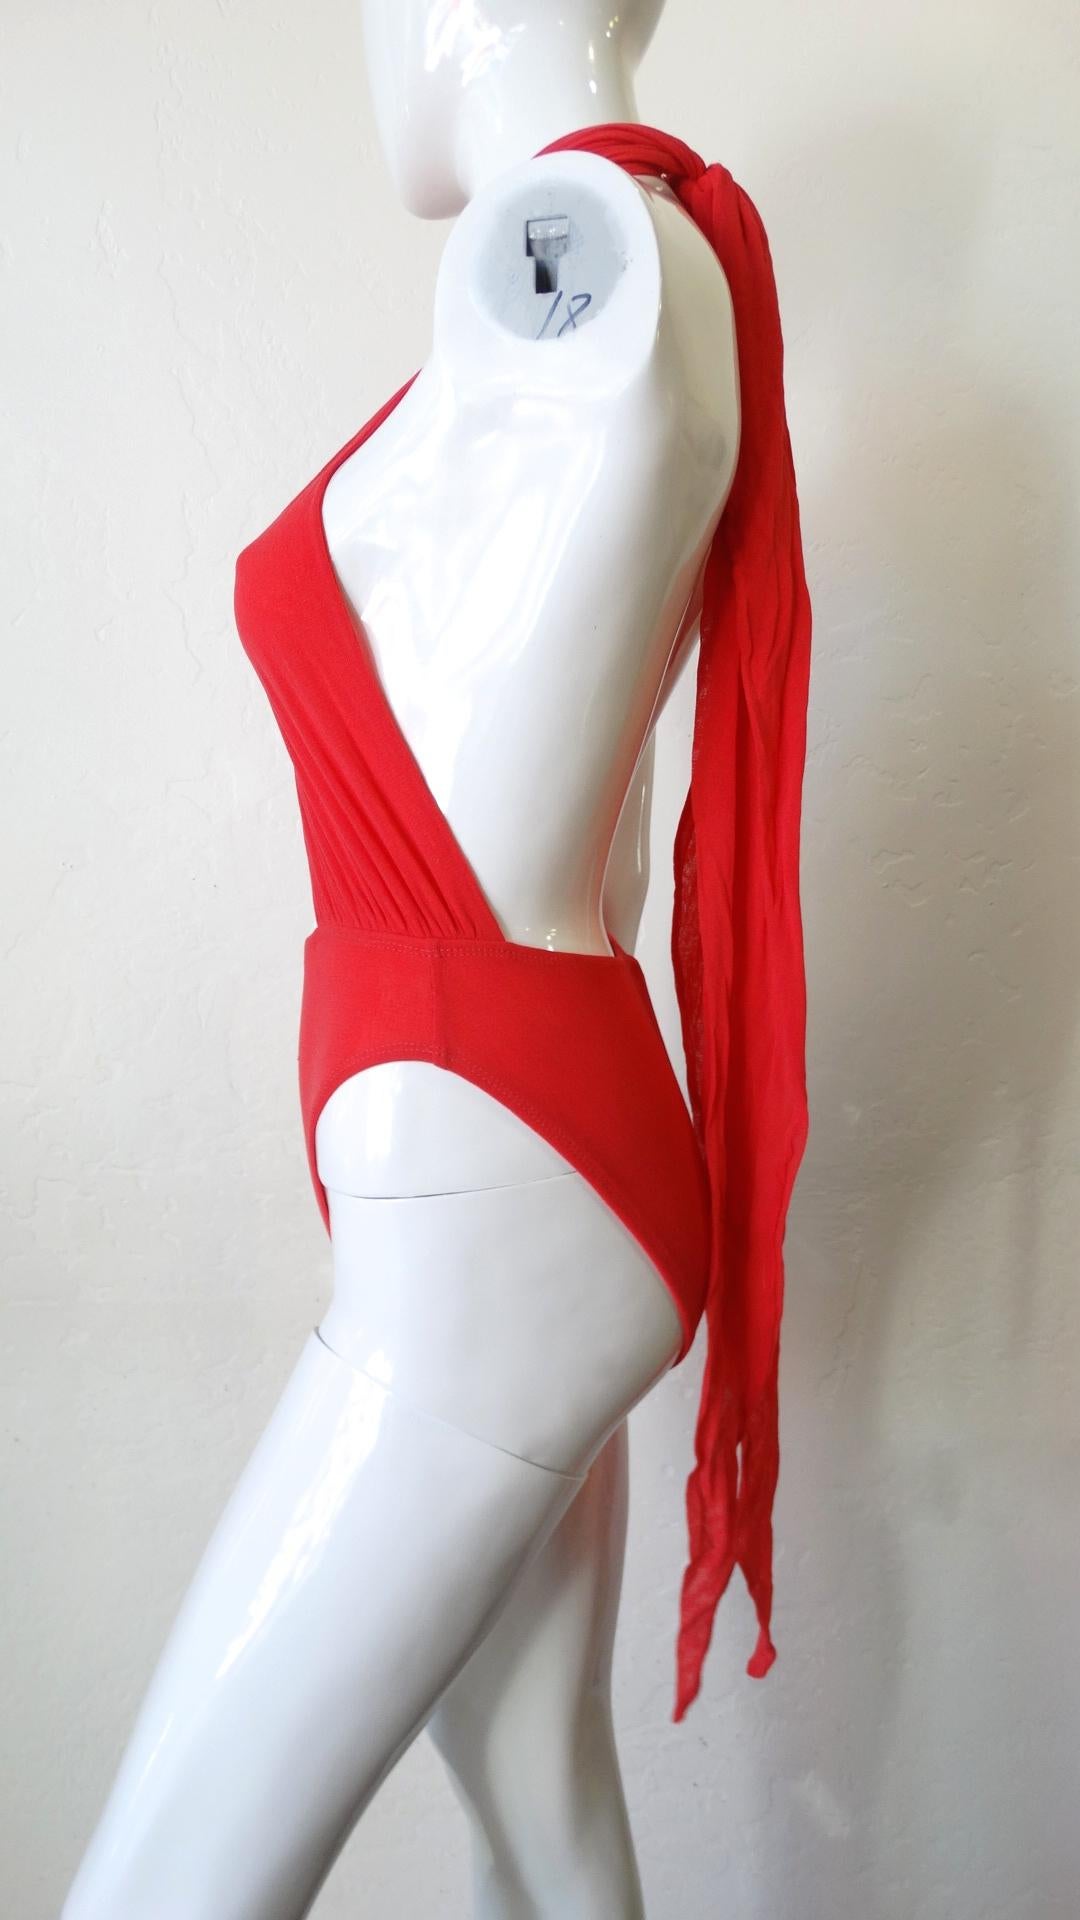 All Eyes On You This Summer! Circa 1980s, this Giorgio di Sant Angelo vibrant red wrap top one piece swimsuit features two wrap ties, allowing you to wear the piece a variety of ways. Bathing suit includes open back, high hip bottoms and is made of